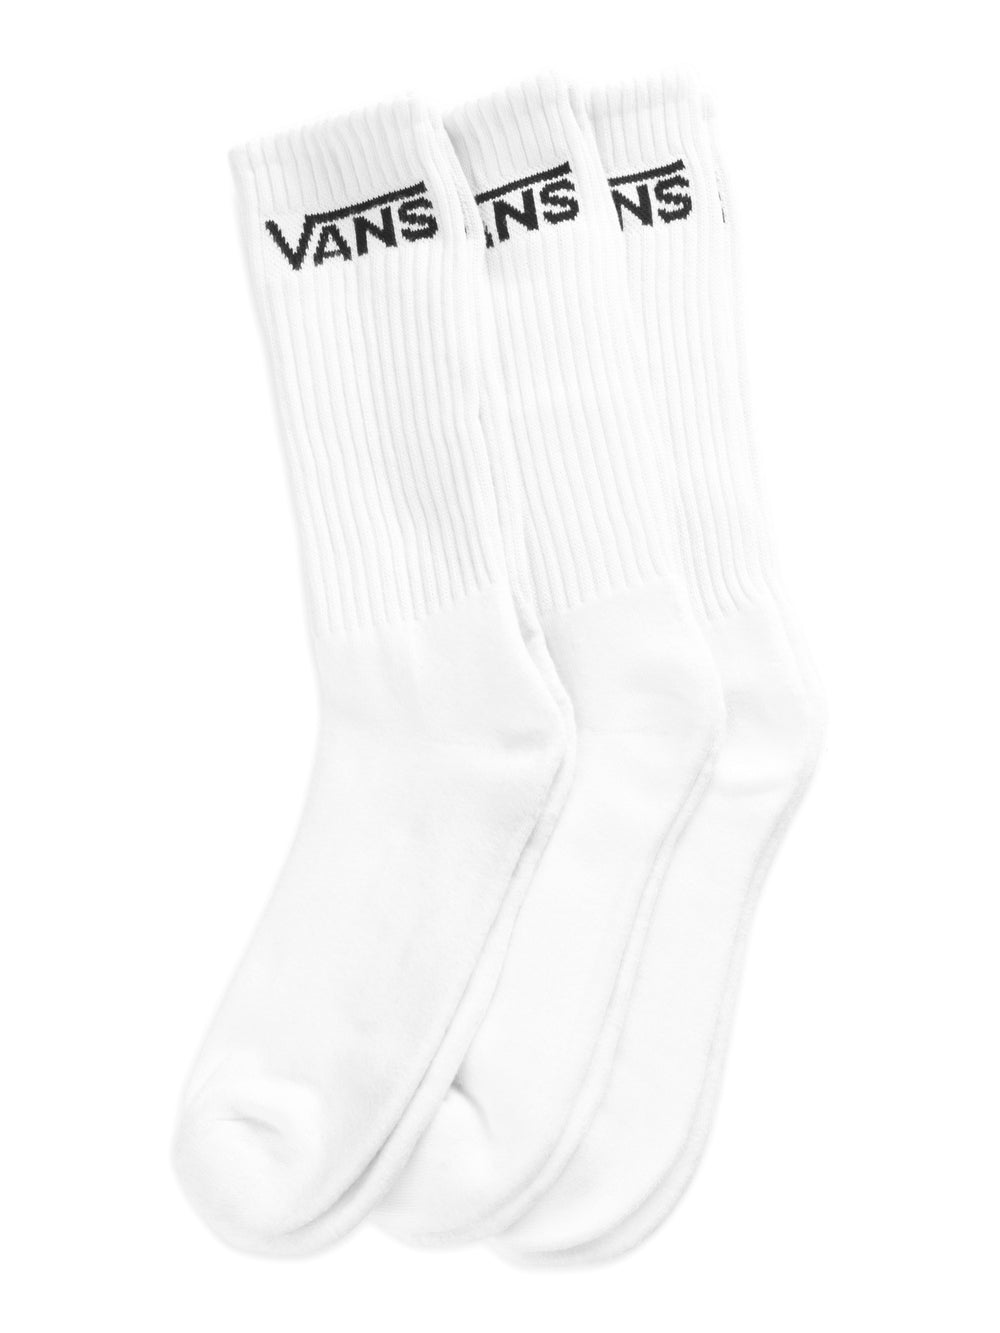 VANS CLASSIC CREW Collective Footwear | 3 SOCKS Boathouse PACK